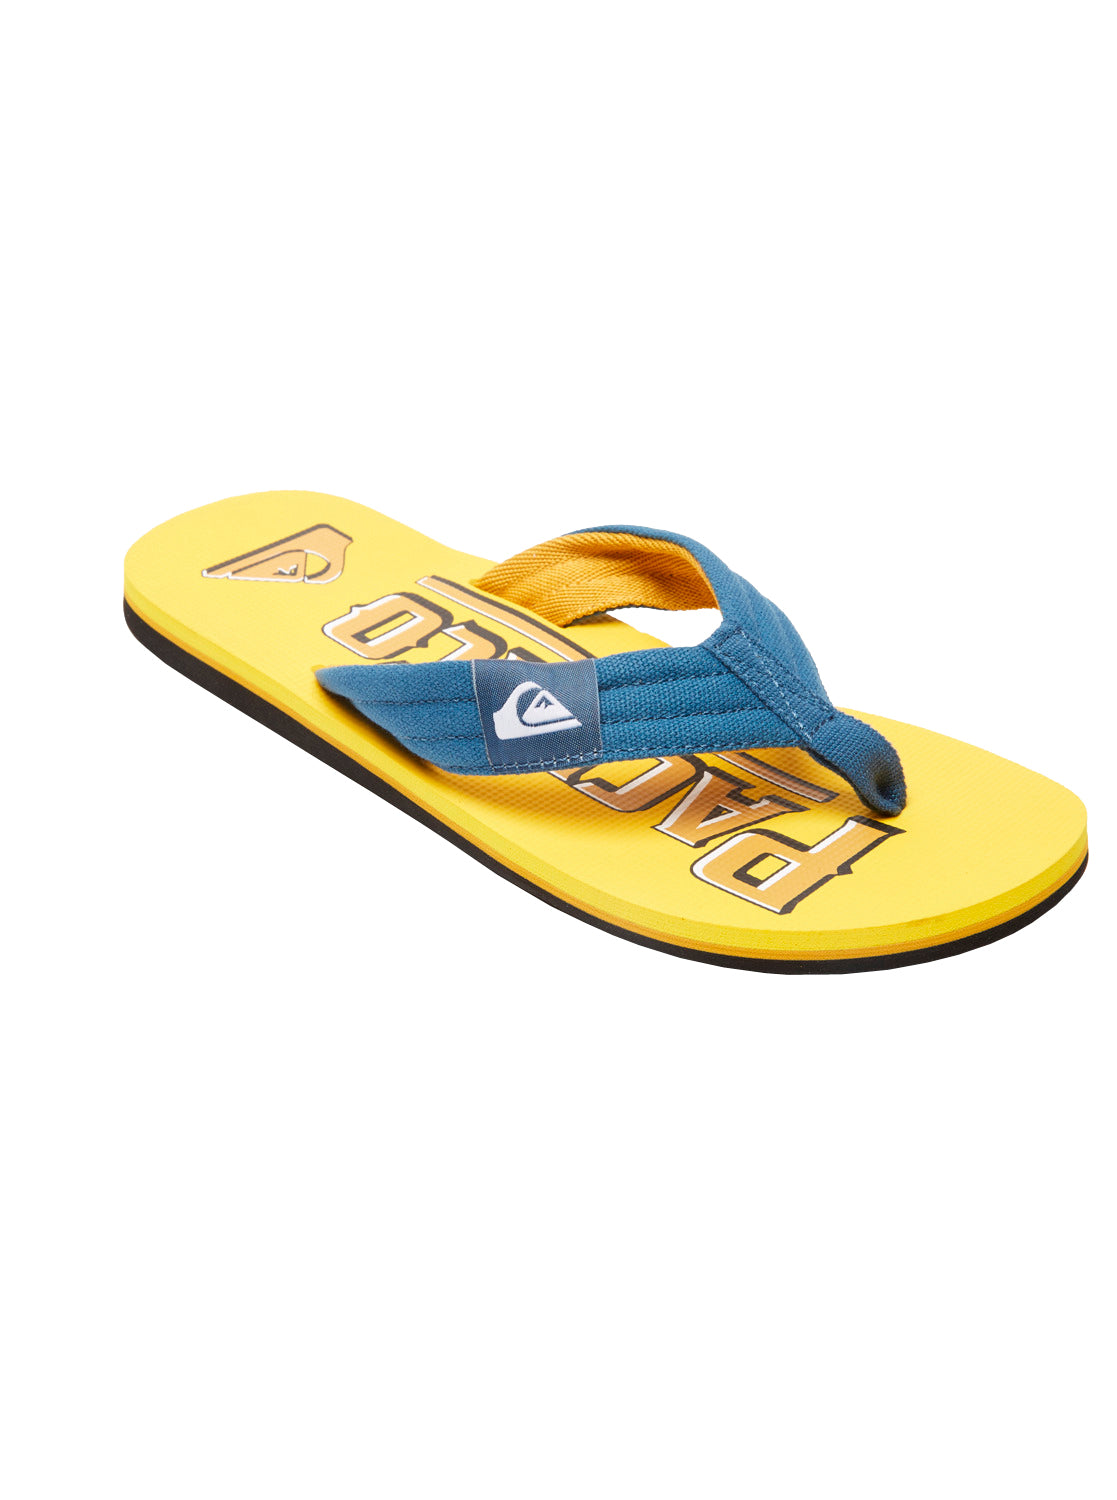 Quiksilver X Pacifico Layback Sandal XKKY 9